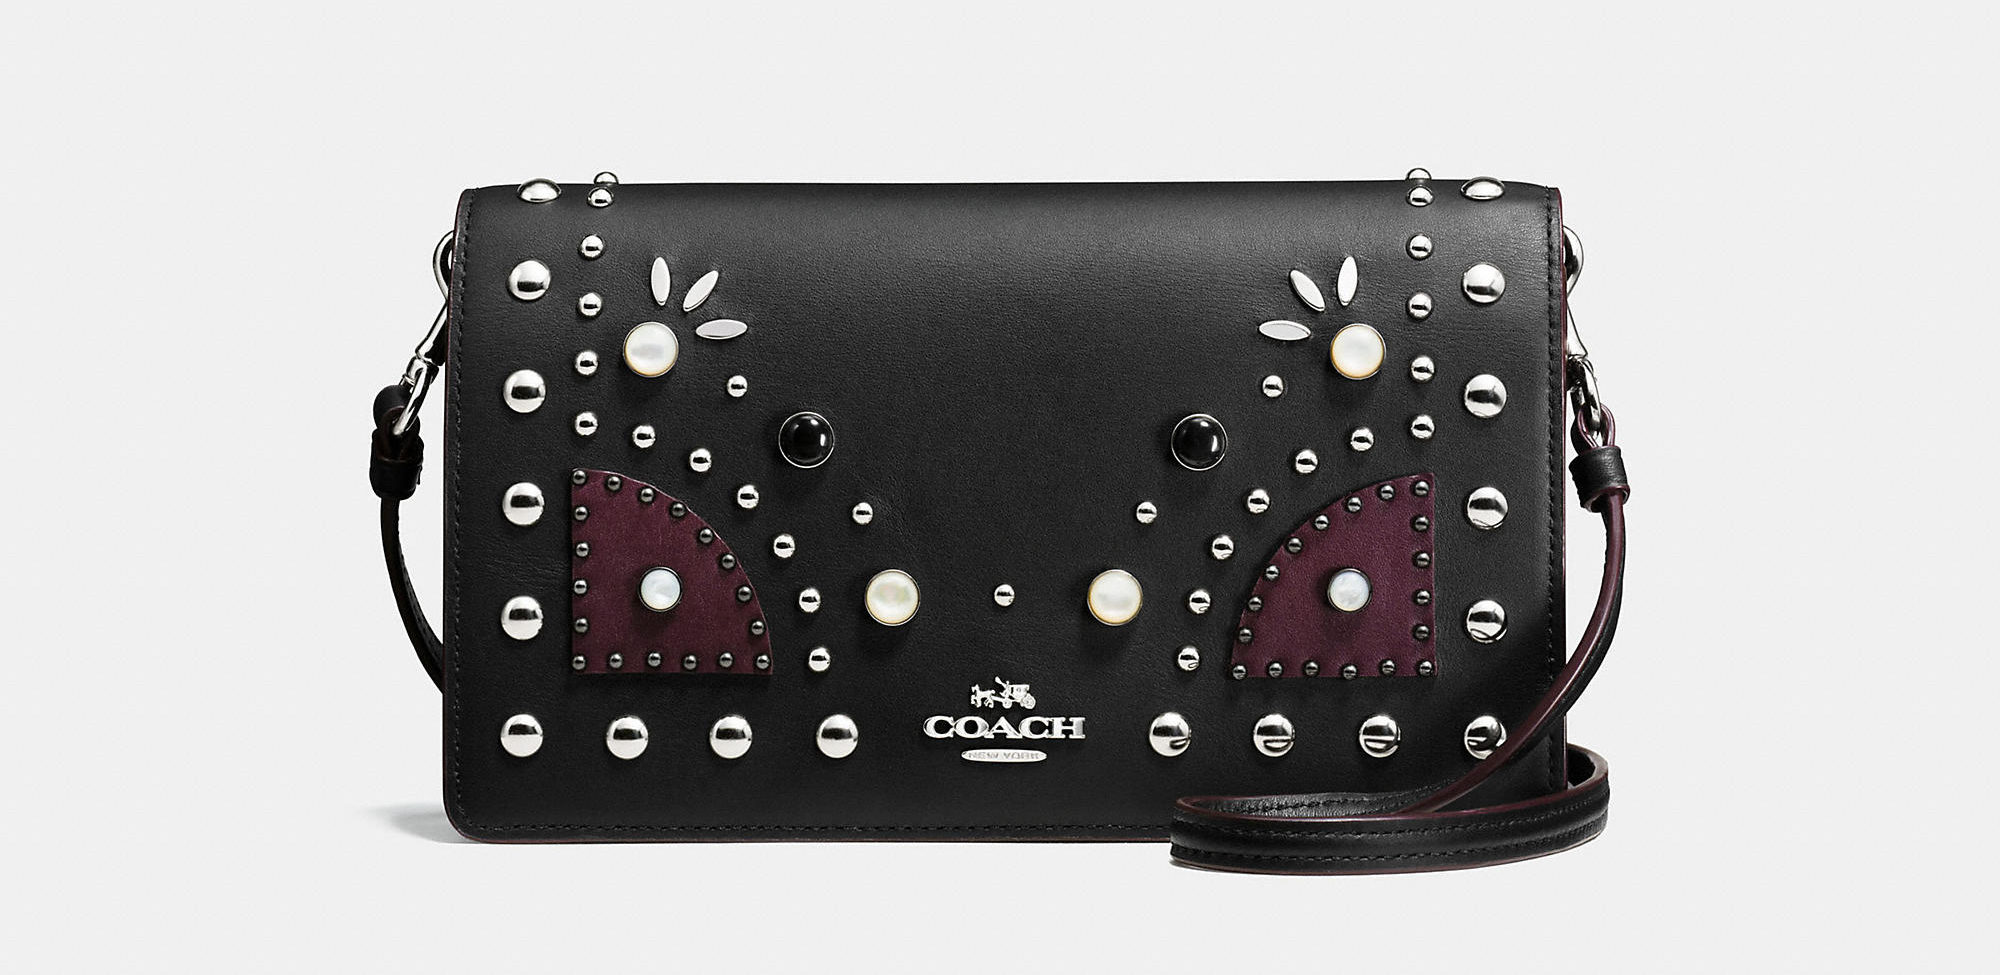 Coach studded bag in black front view